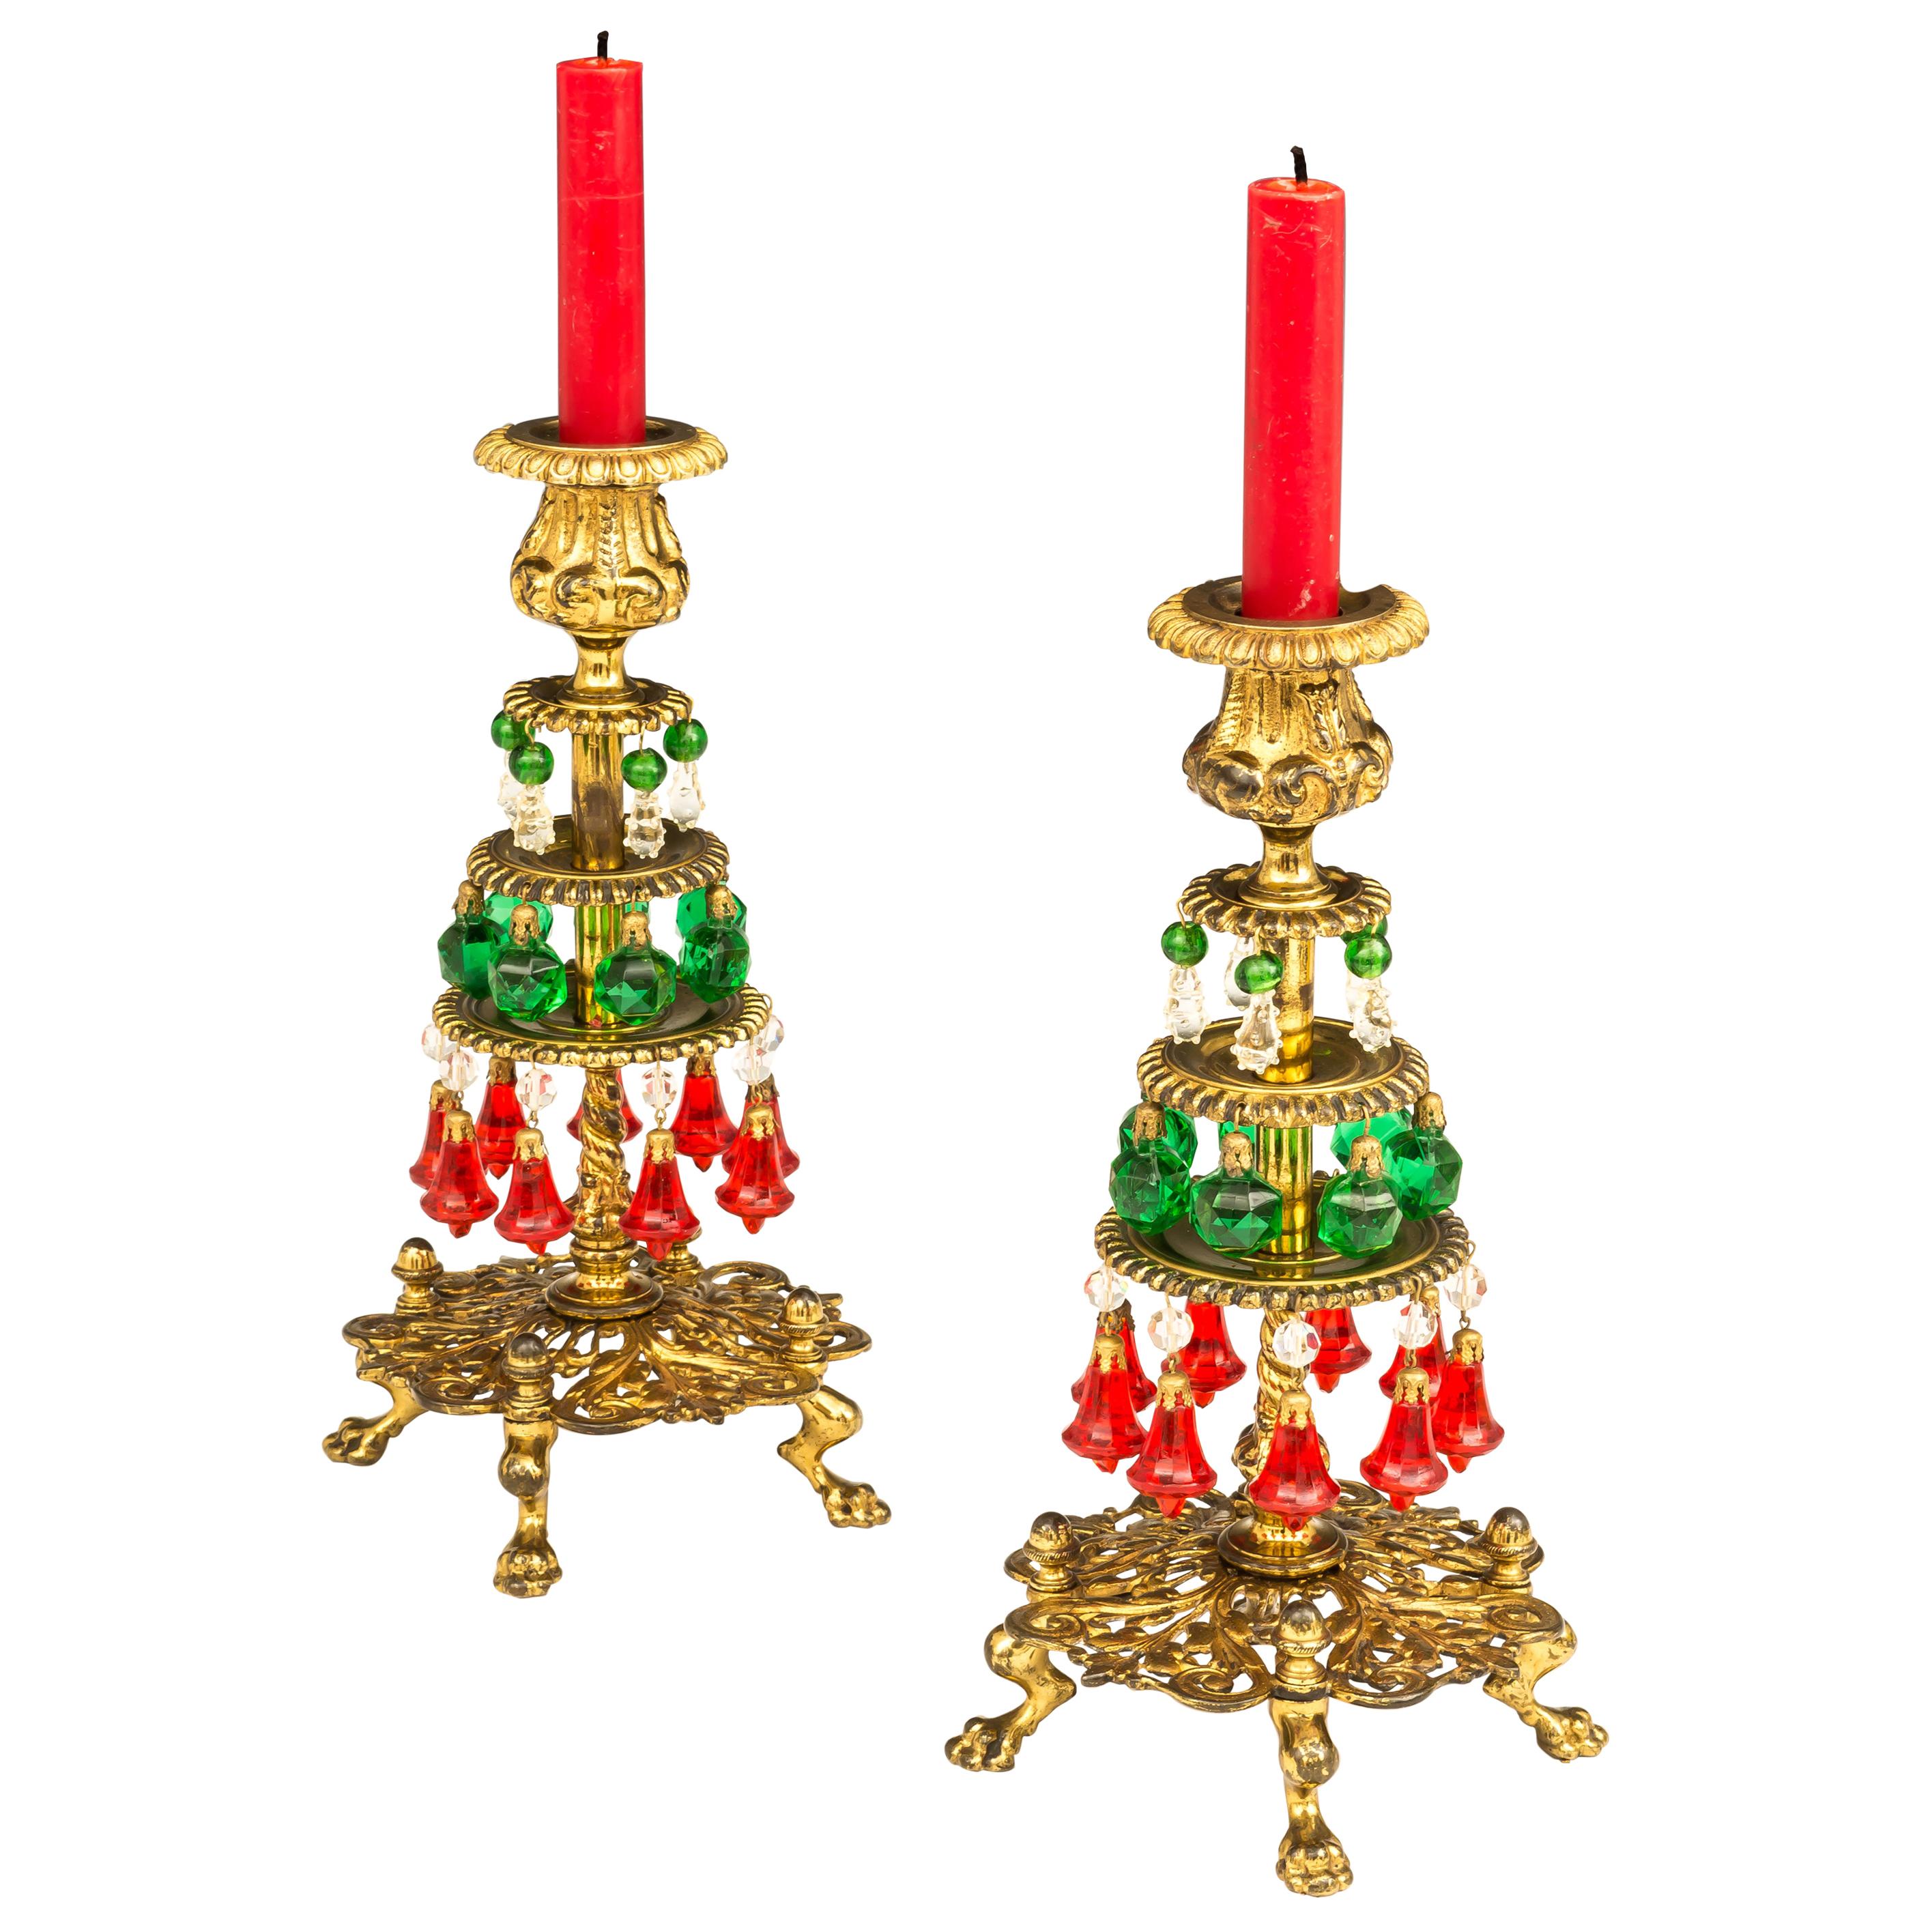 Unusual Pair of Victorian Christmas Candlesticks